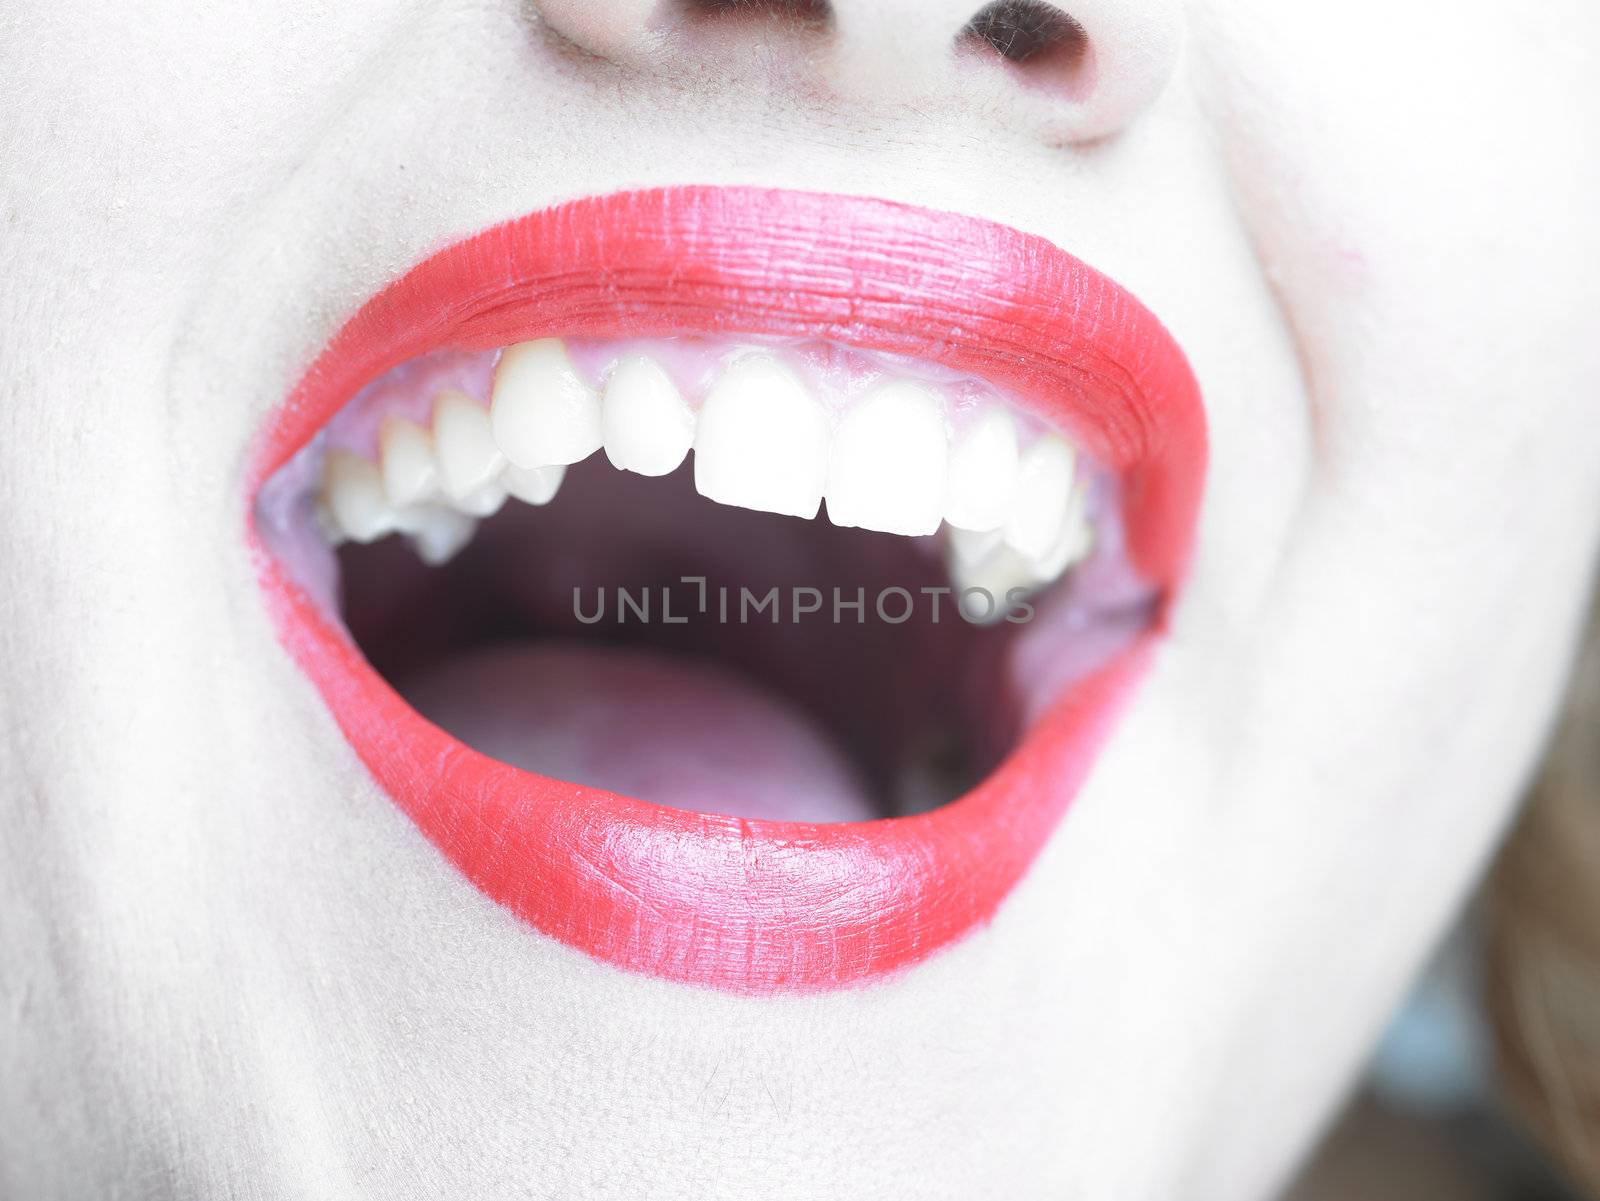 Red Lips and Beautiful teeth Smiling with wide open smile